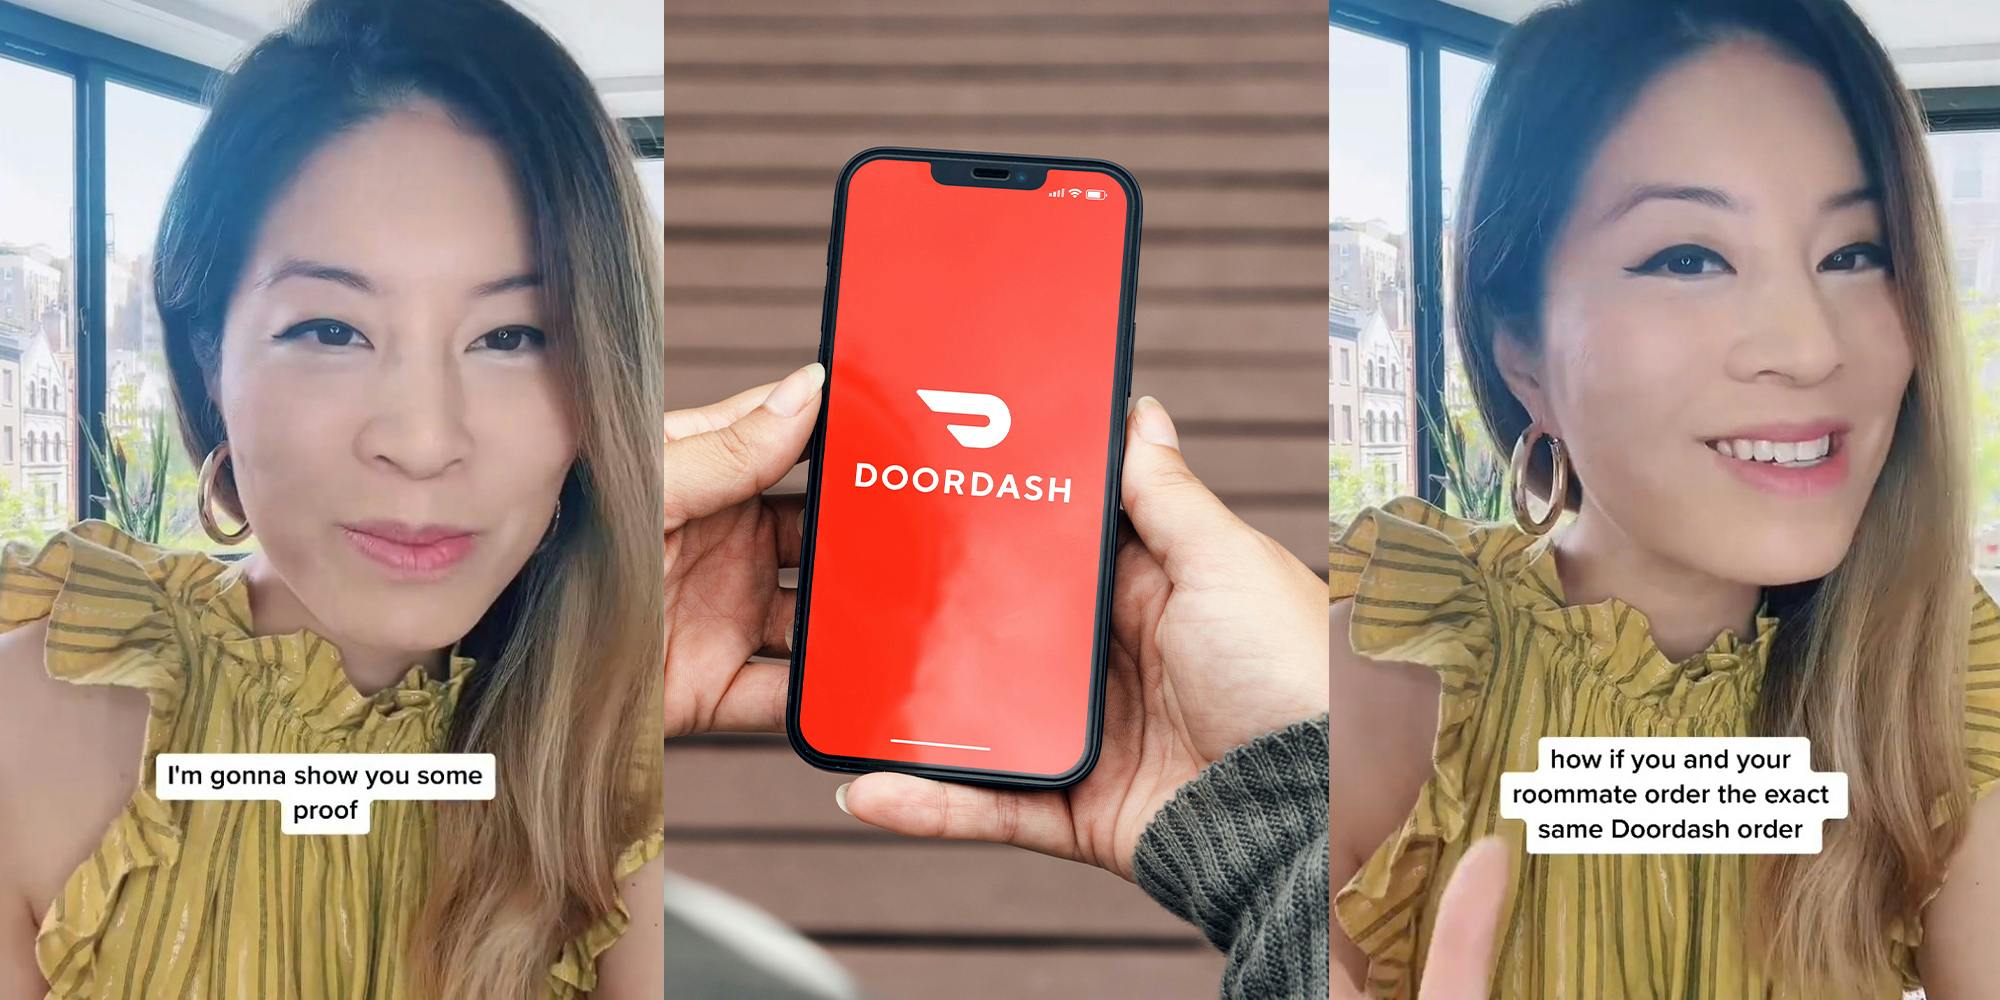 DoorDash Allegedly Charges iPhone Users More than Android